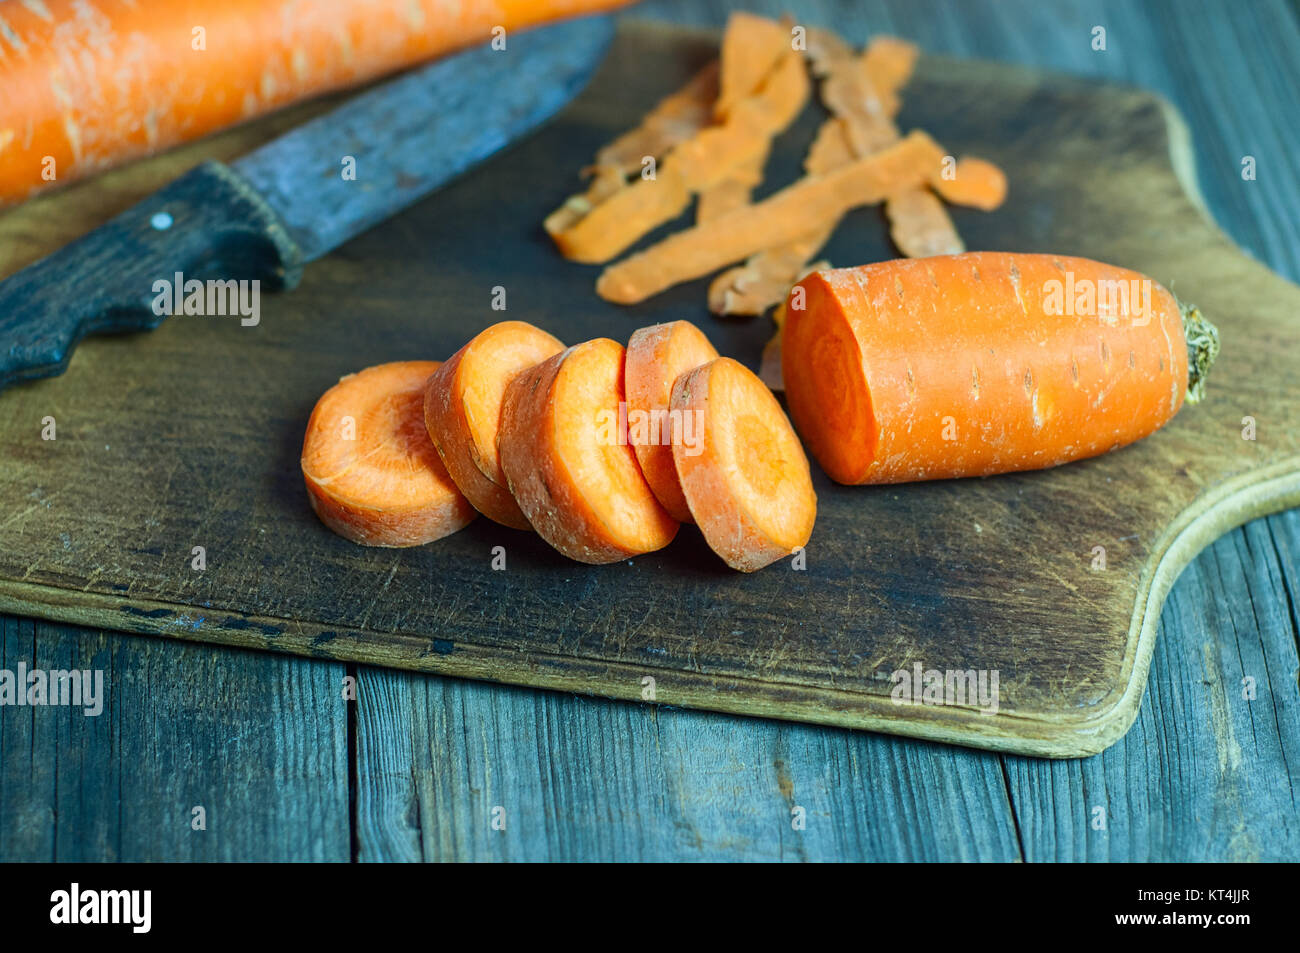 Chopped carrot on a chopping board slices Stock Photo